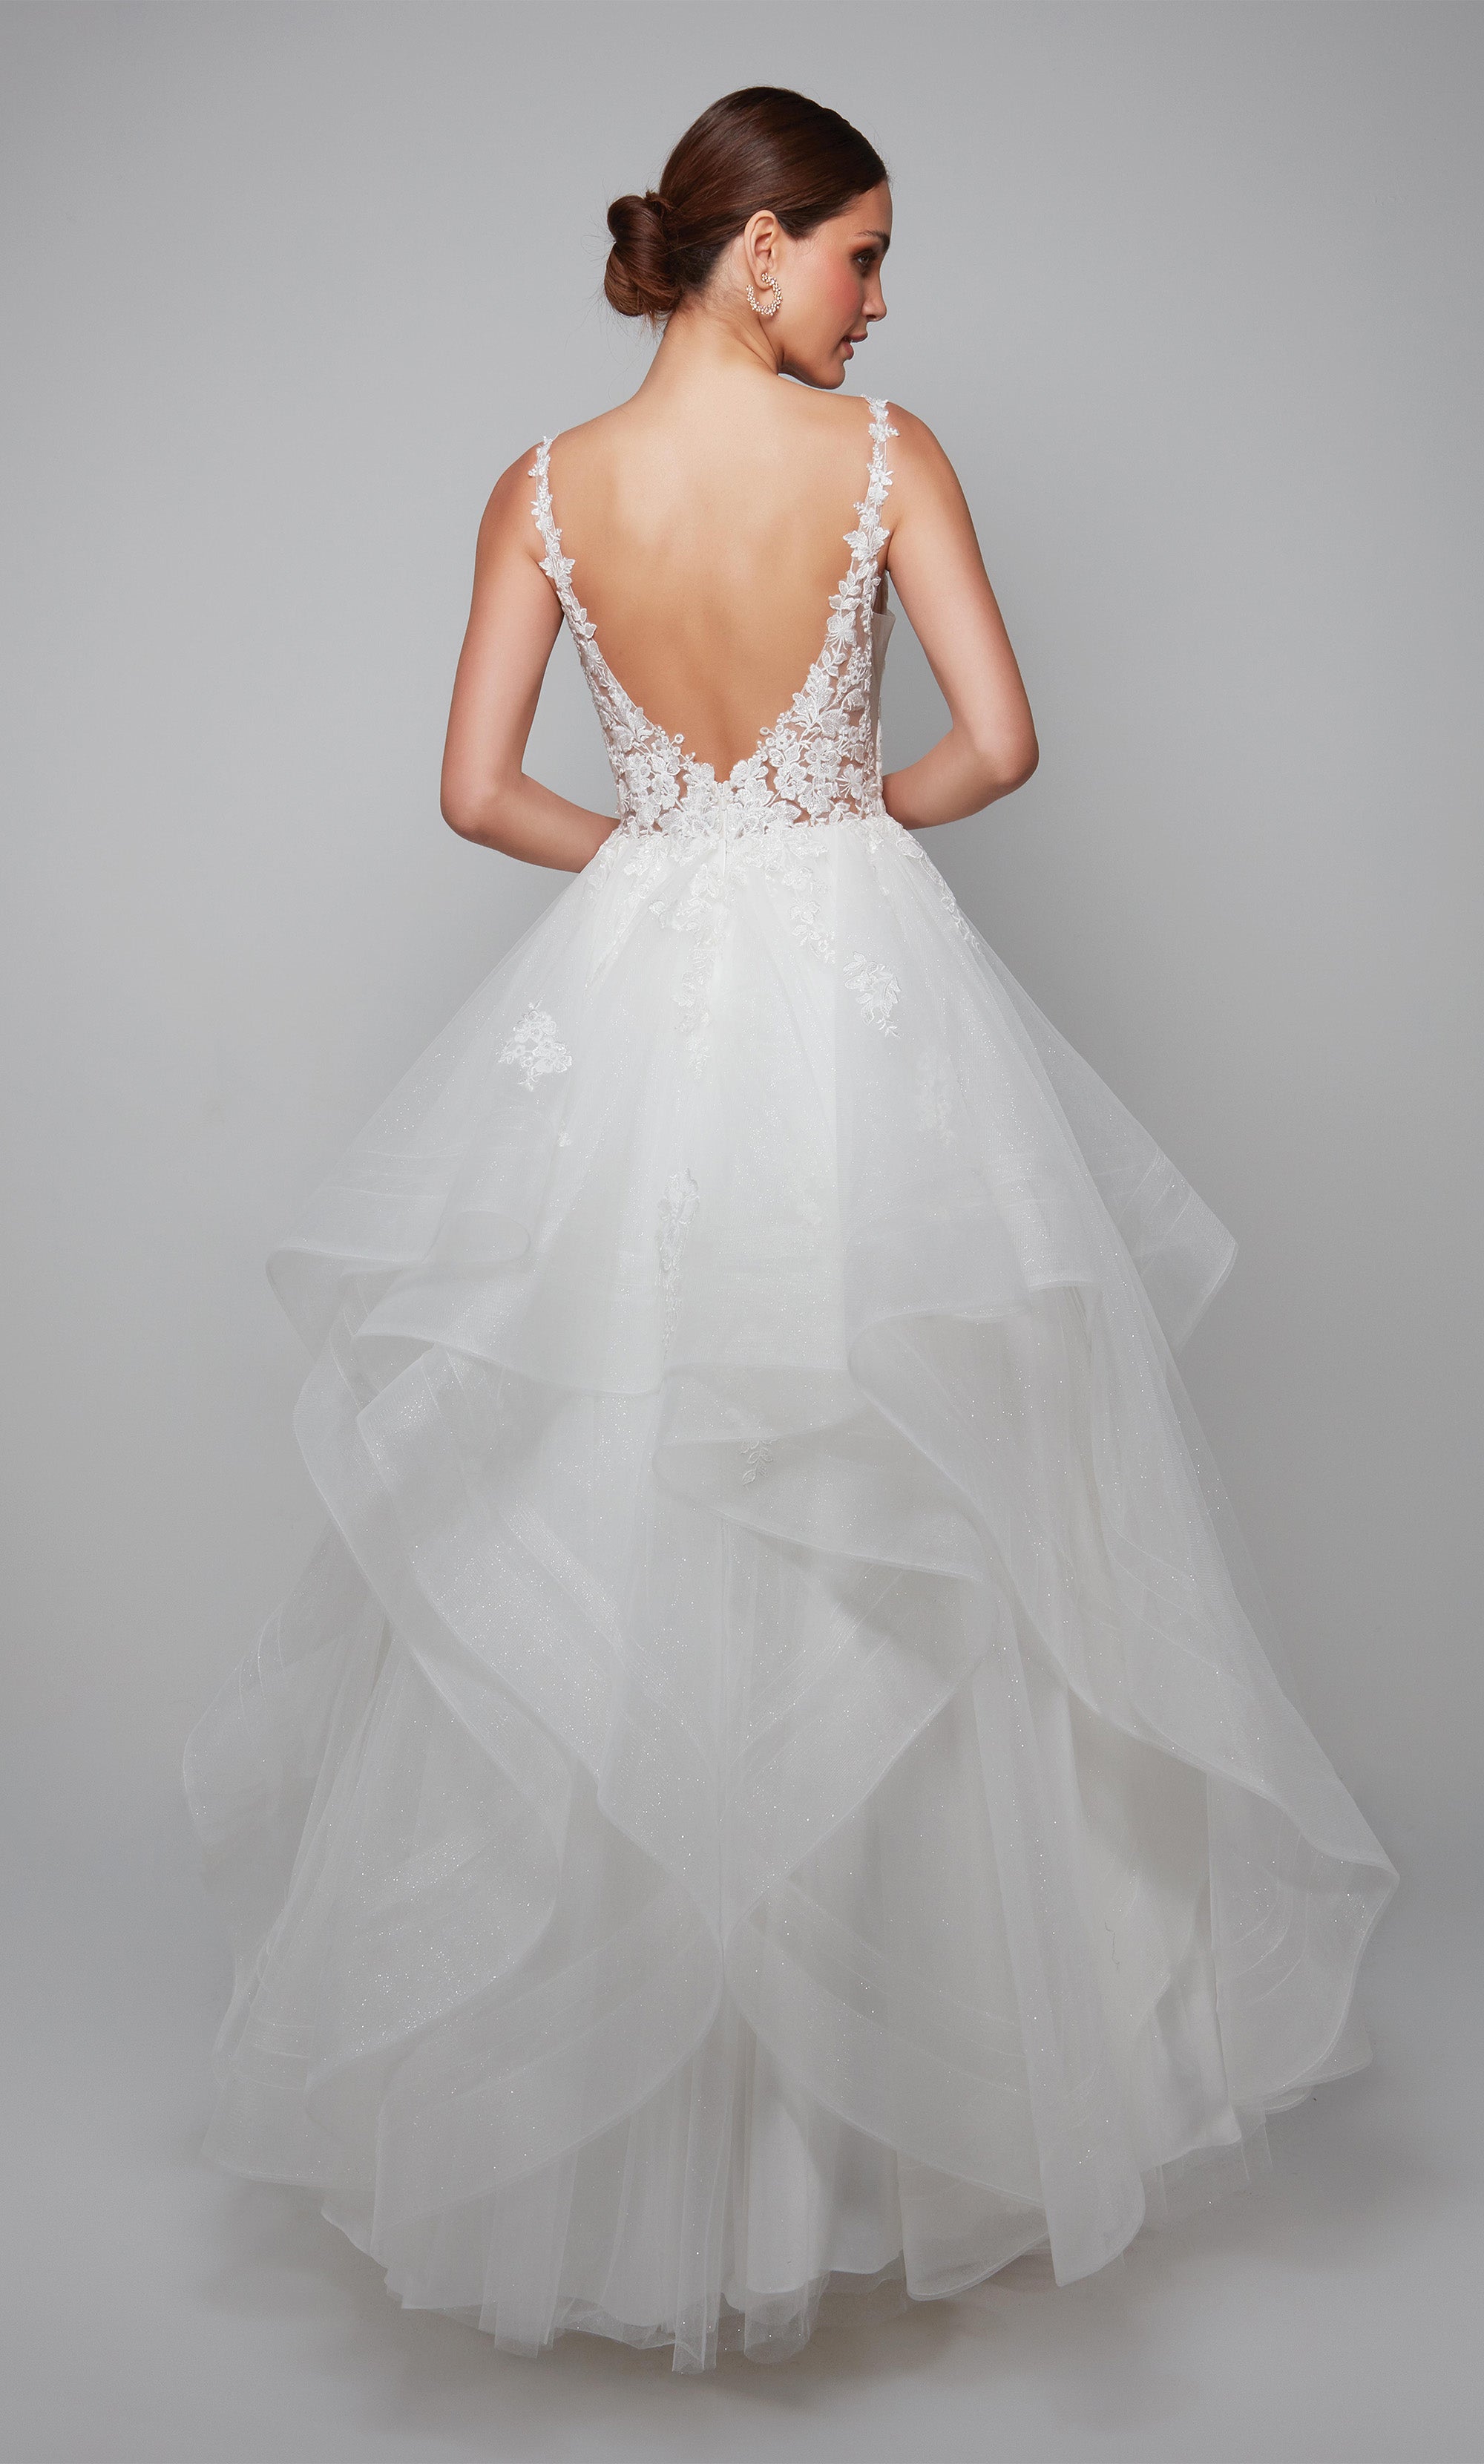 Formal Dress: 7082. Long, Plunging Neckline, Ball Gown | Alyce Paris